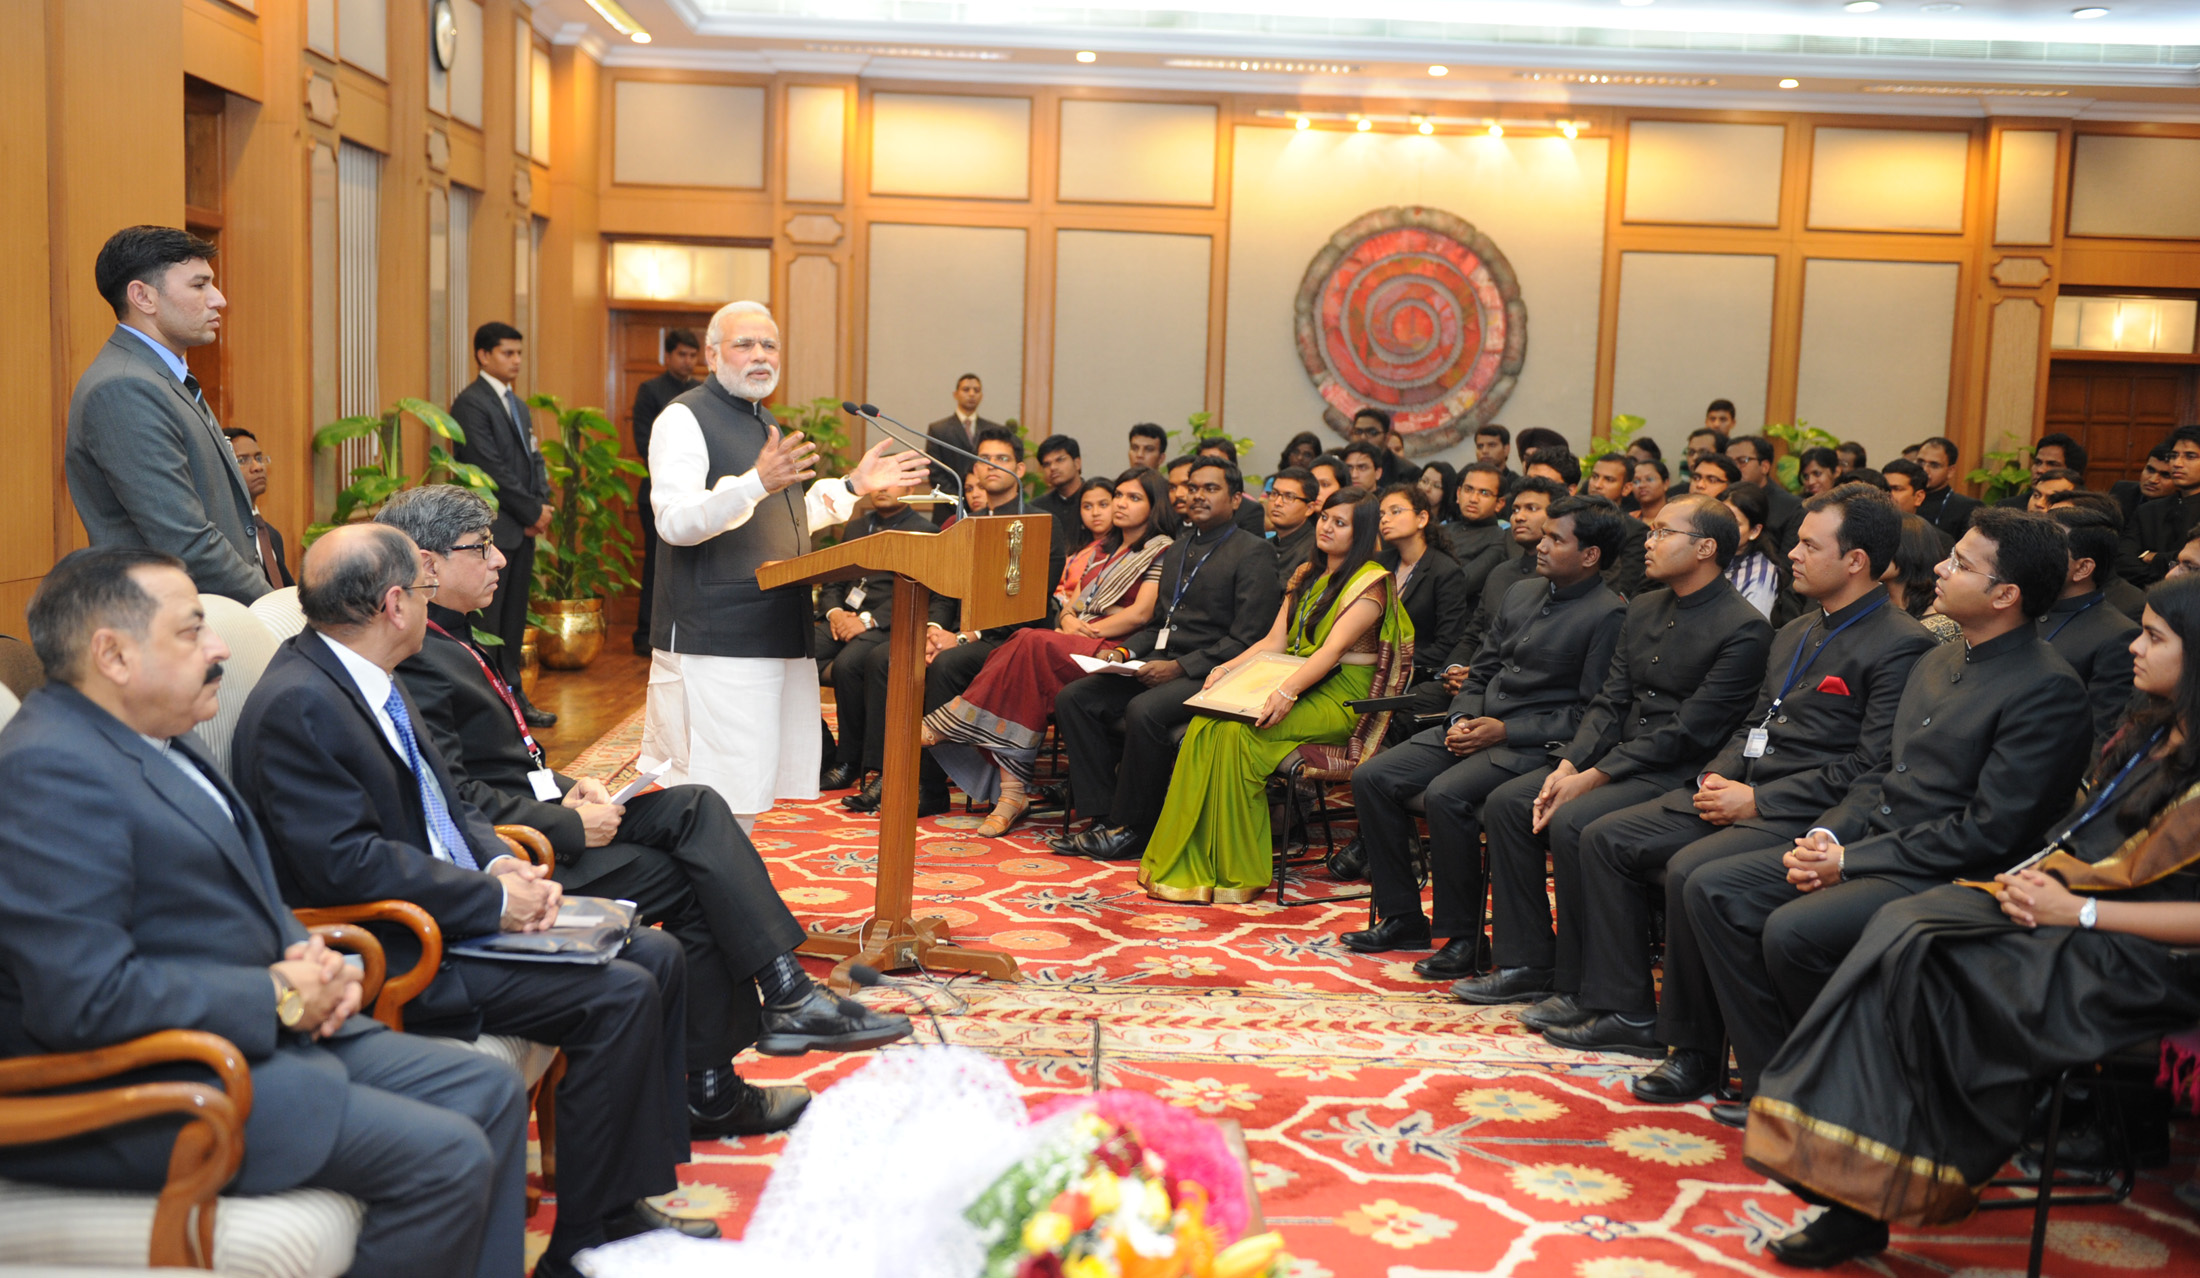 The IAS Probationers calls on the Prime Minister, Shri Narendra Modi, in New Delhi on February 16, 2015.  The Minister of State for Development of North Eastern Region (I/C), Prime Ministers Office, Personnel, Public Grievances & Pensions, Department of Atomic Energy, Department of Space, Dr. Jitendra Singh is also seen.